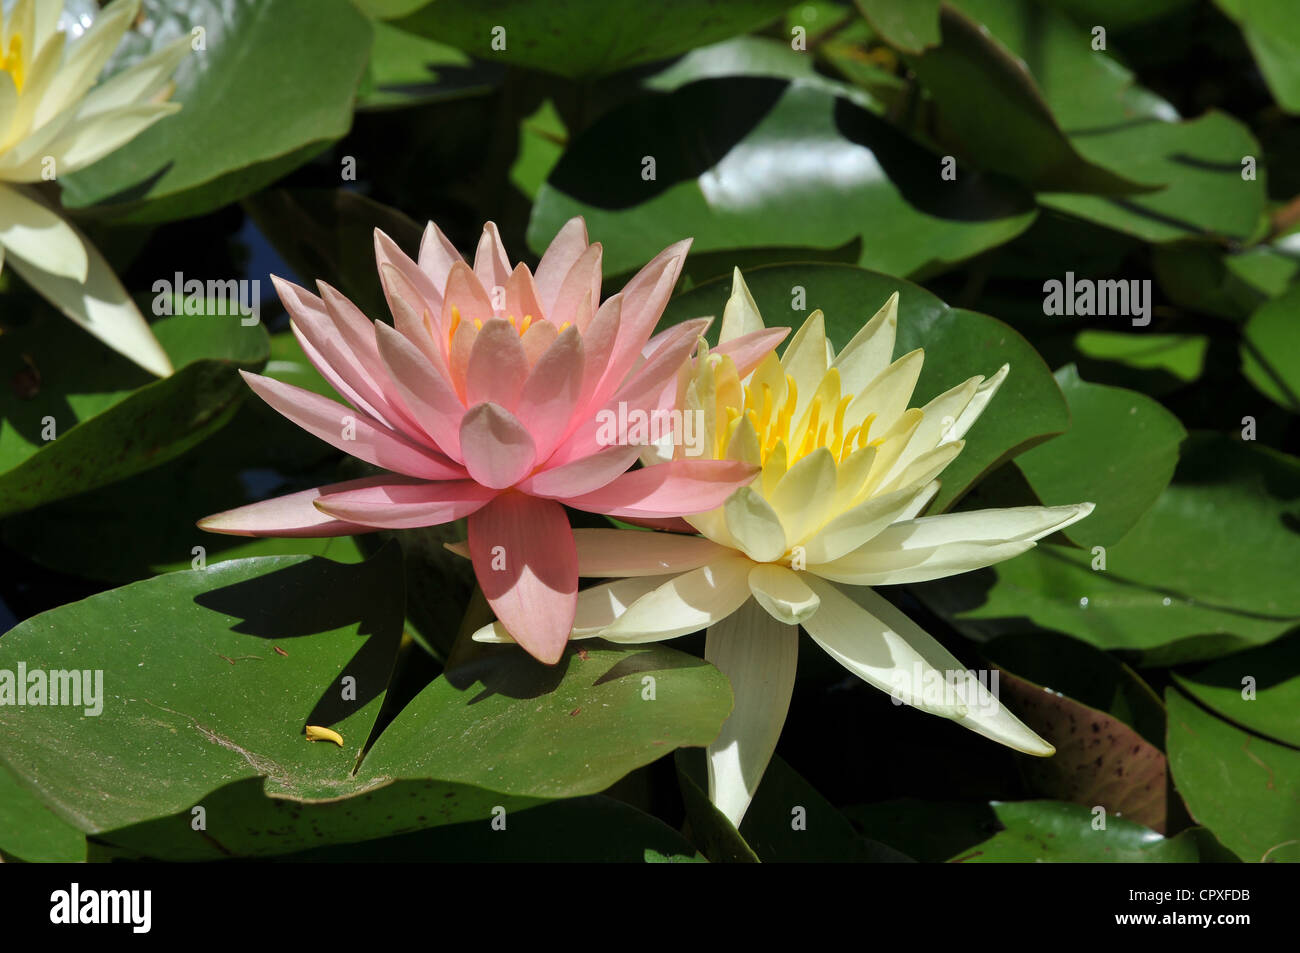 Nymphaea /nimfiea is a genus of aquatic plants in the family Nymphaeaceae. Stock Photo